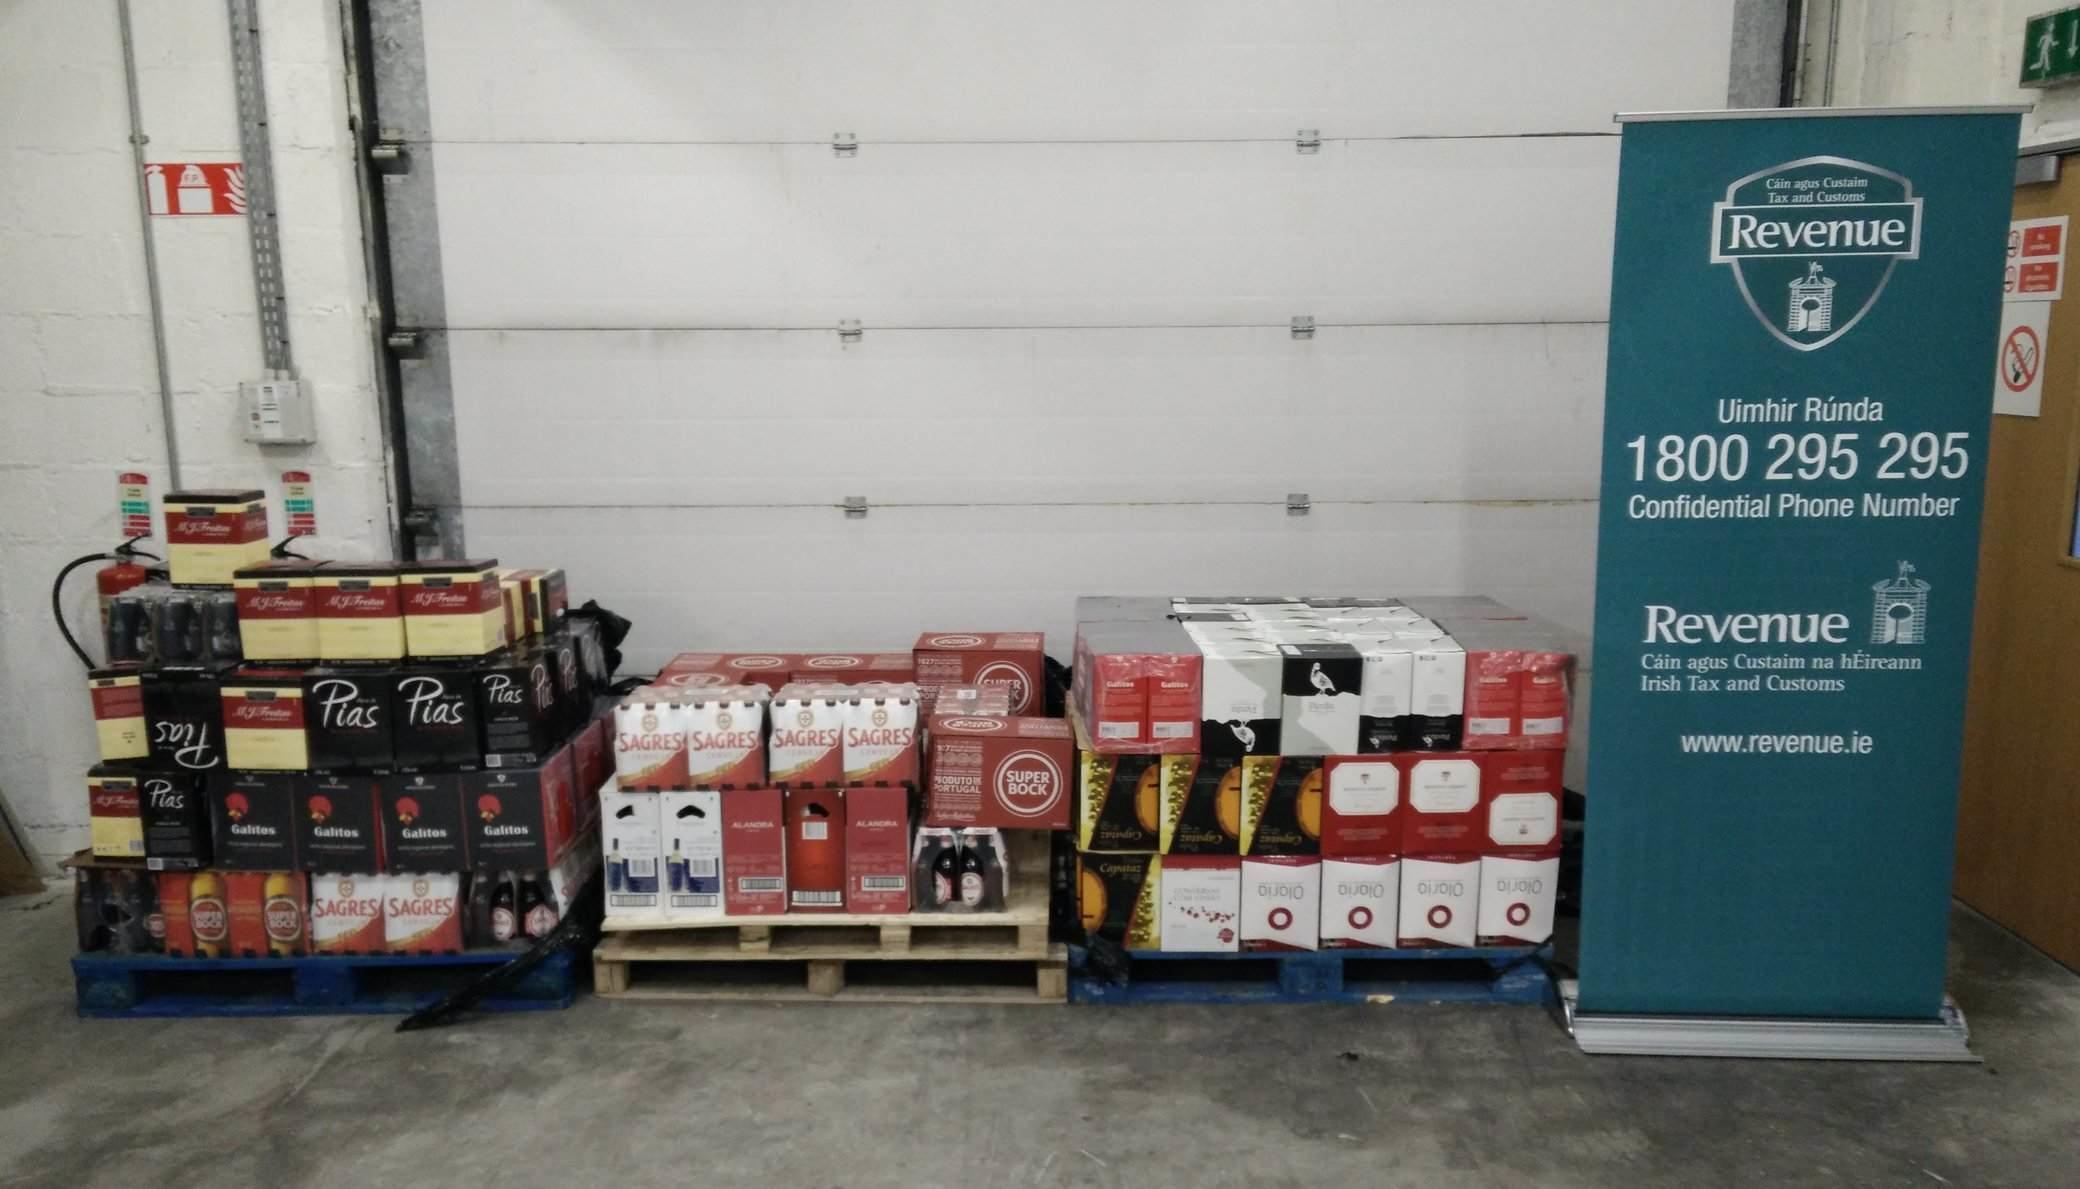 Excise revenue officers seized almost 1,250 litres of undeclared alcohol when they searched a container that arrived into Dublin Port from Portugal yesterday.